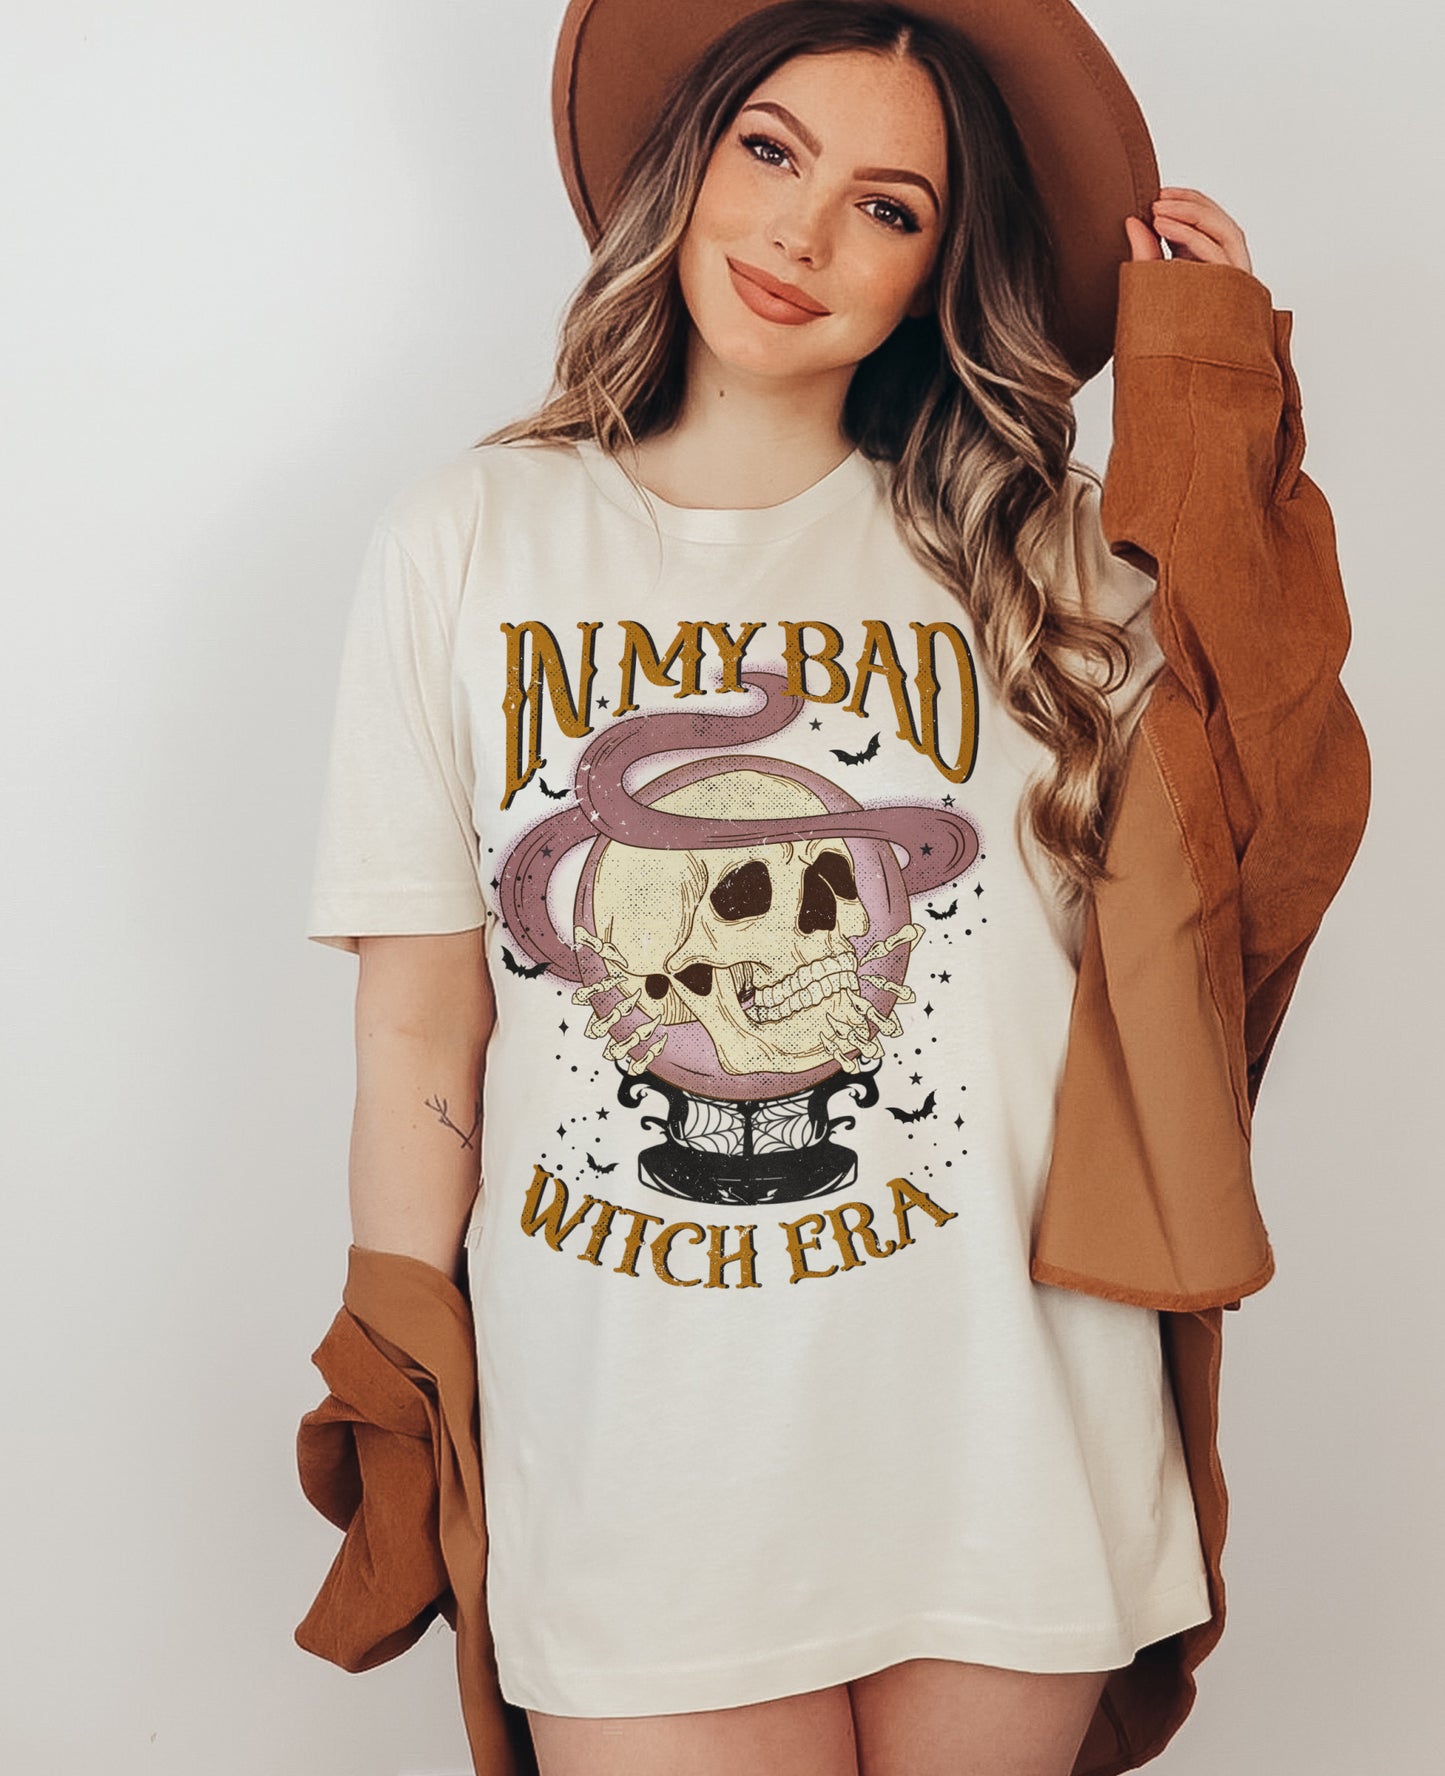 Comfort Colors or Bella Canvas Brand In My Bad Witch Era Halloween Shirt  -  Adult Sizes